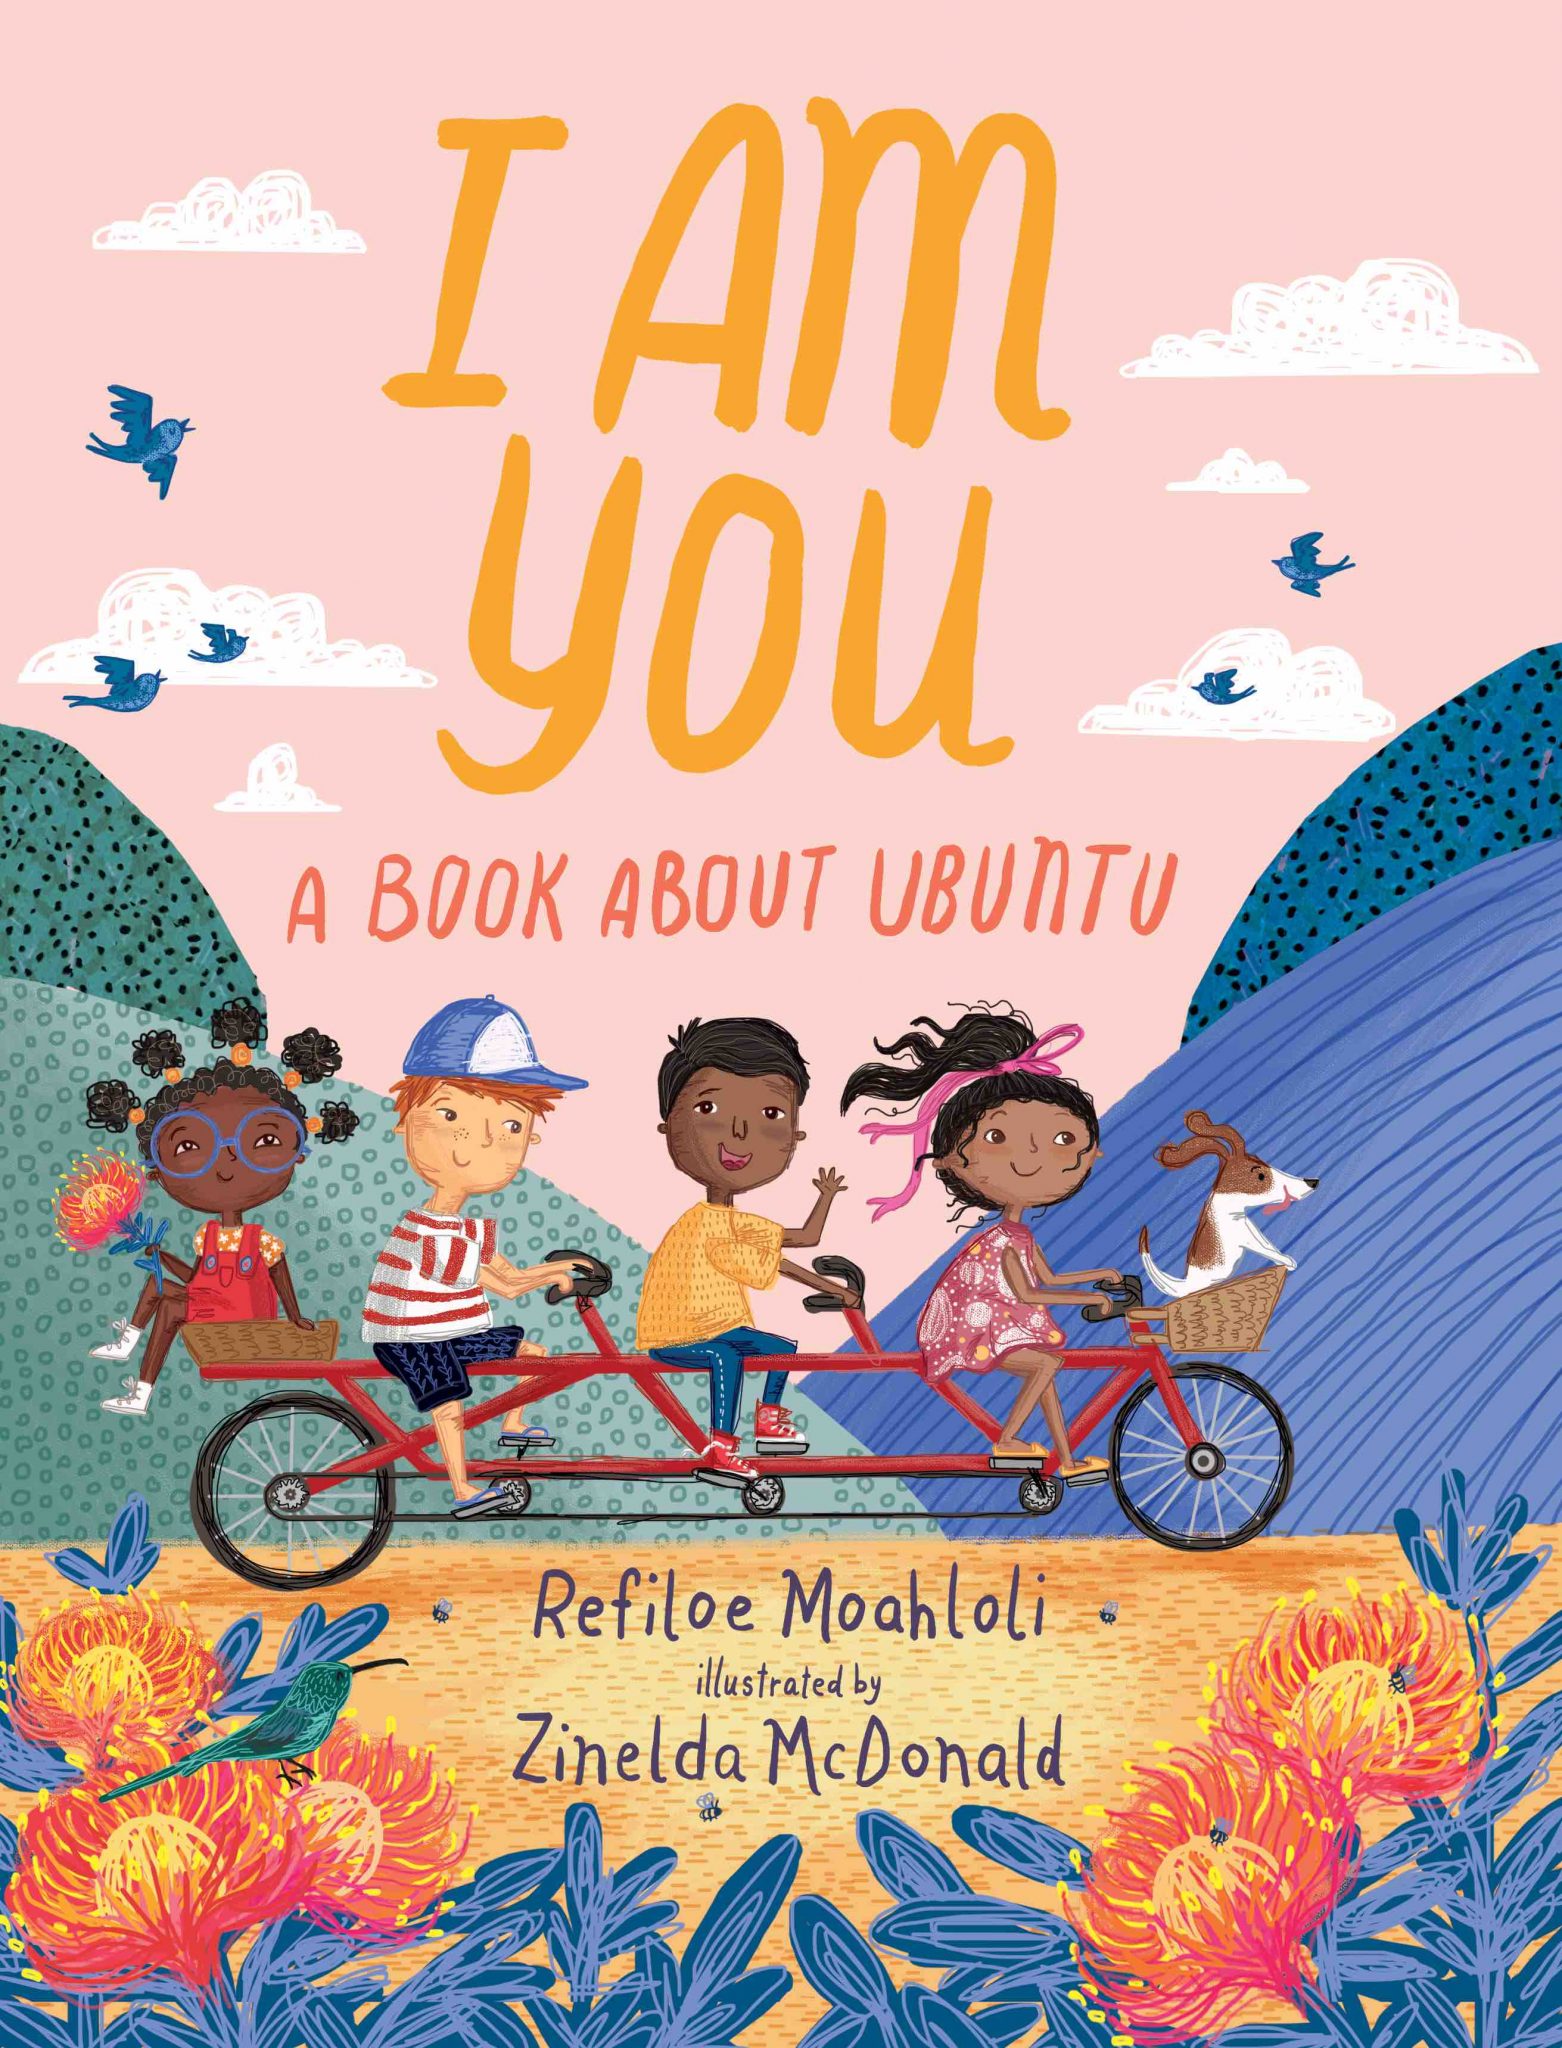 Cover for I am You: A Book about Ubuntu featuring an illustration of four kids who are all of different ethnicities on a tandem bicycle that seats three with a dog in the front basket and the last kid in the back basket. They're riding through a colorful natural landscape of rolling hills where each hill is a different color and orange flowers are in the foreground. The ground is orange and the sky is light pink with blue birds in it. The title is displayed in orange and pink.